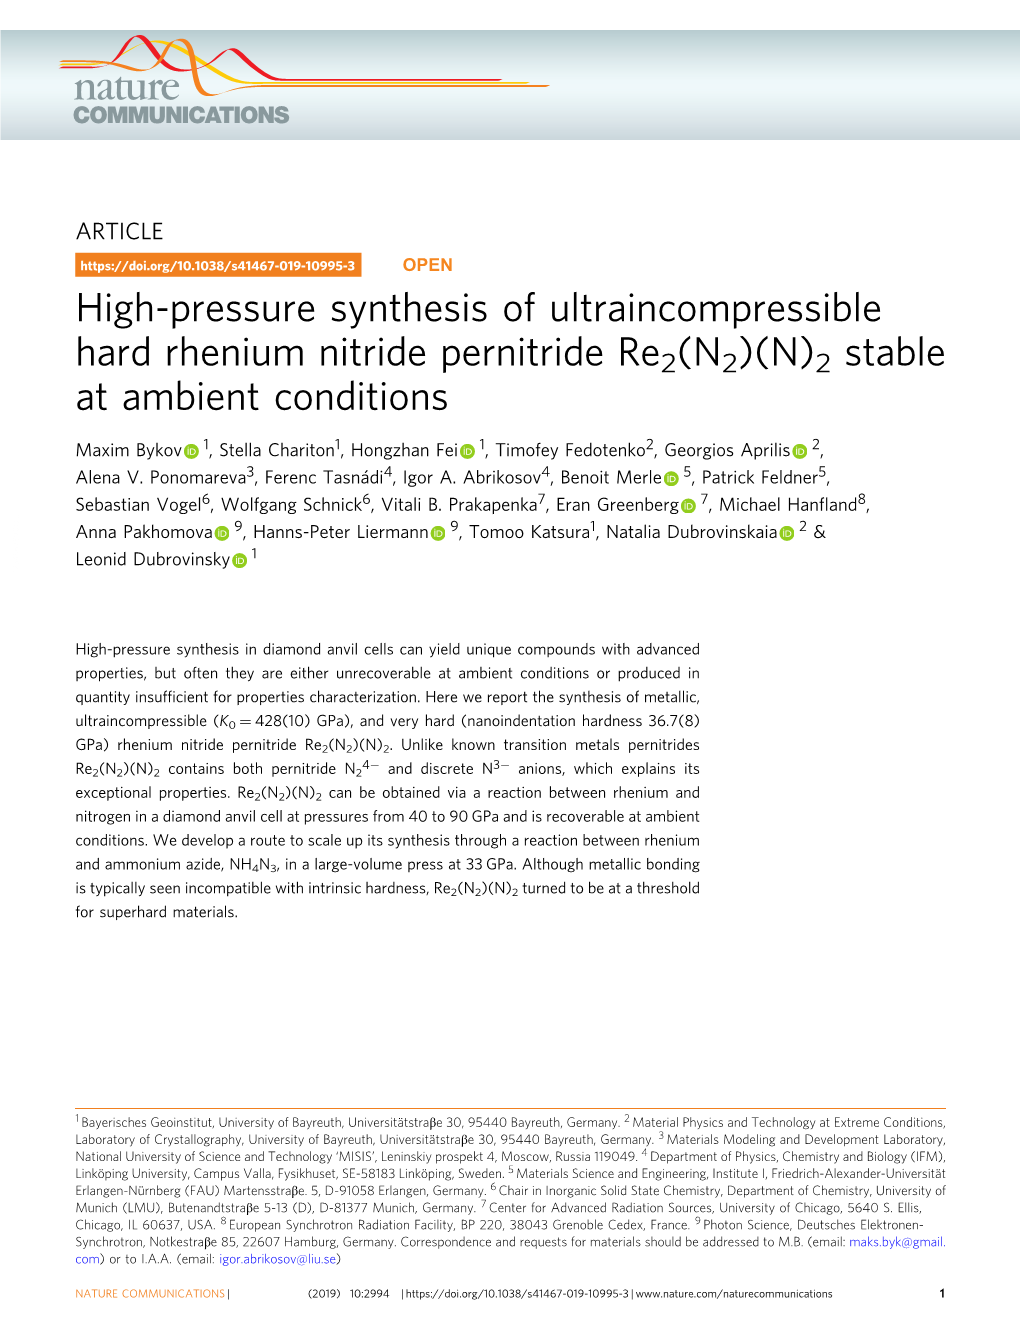 High-Pressure Synthesis of Ultraincompressible Hard Rhenium Nitride Pernitride Re2(N2)(N)2 Stable at Ambient Conditions